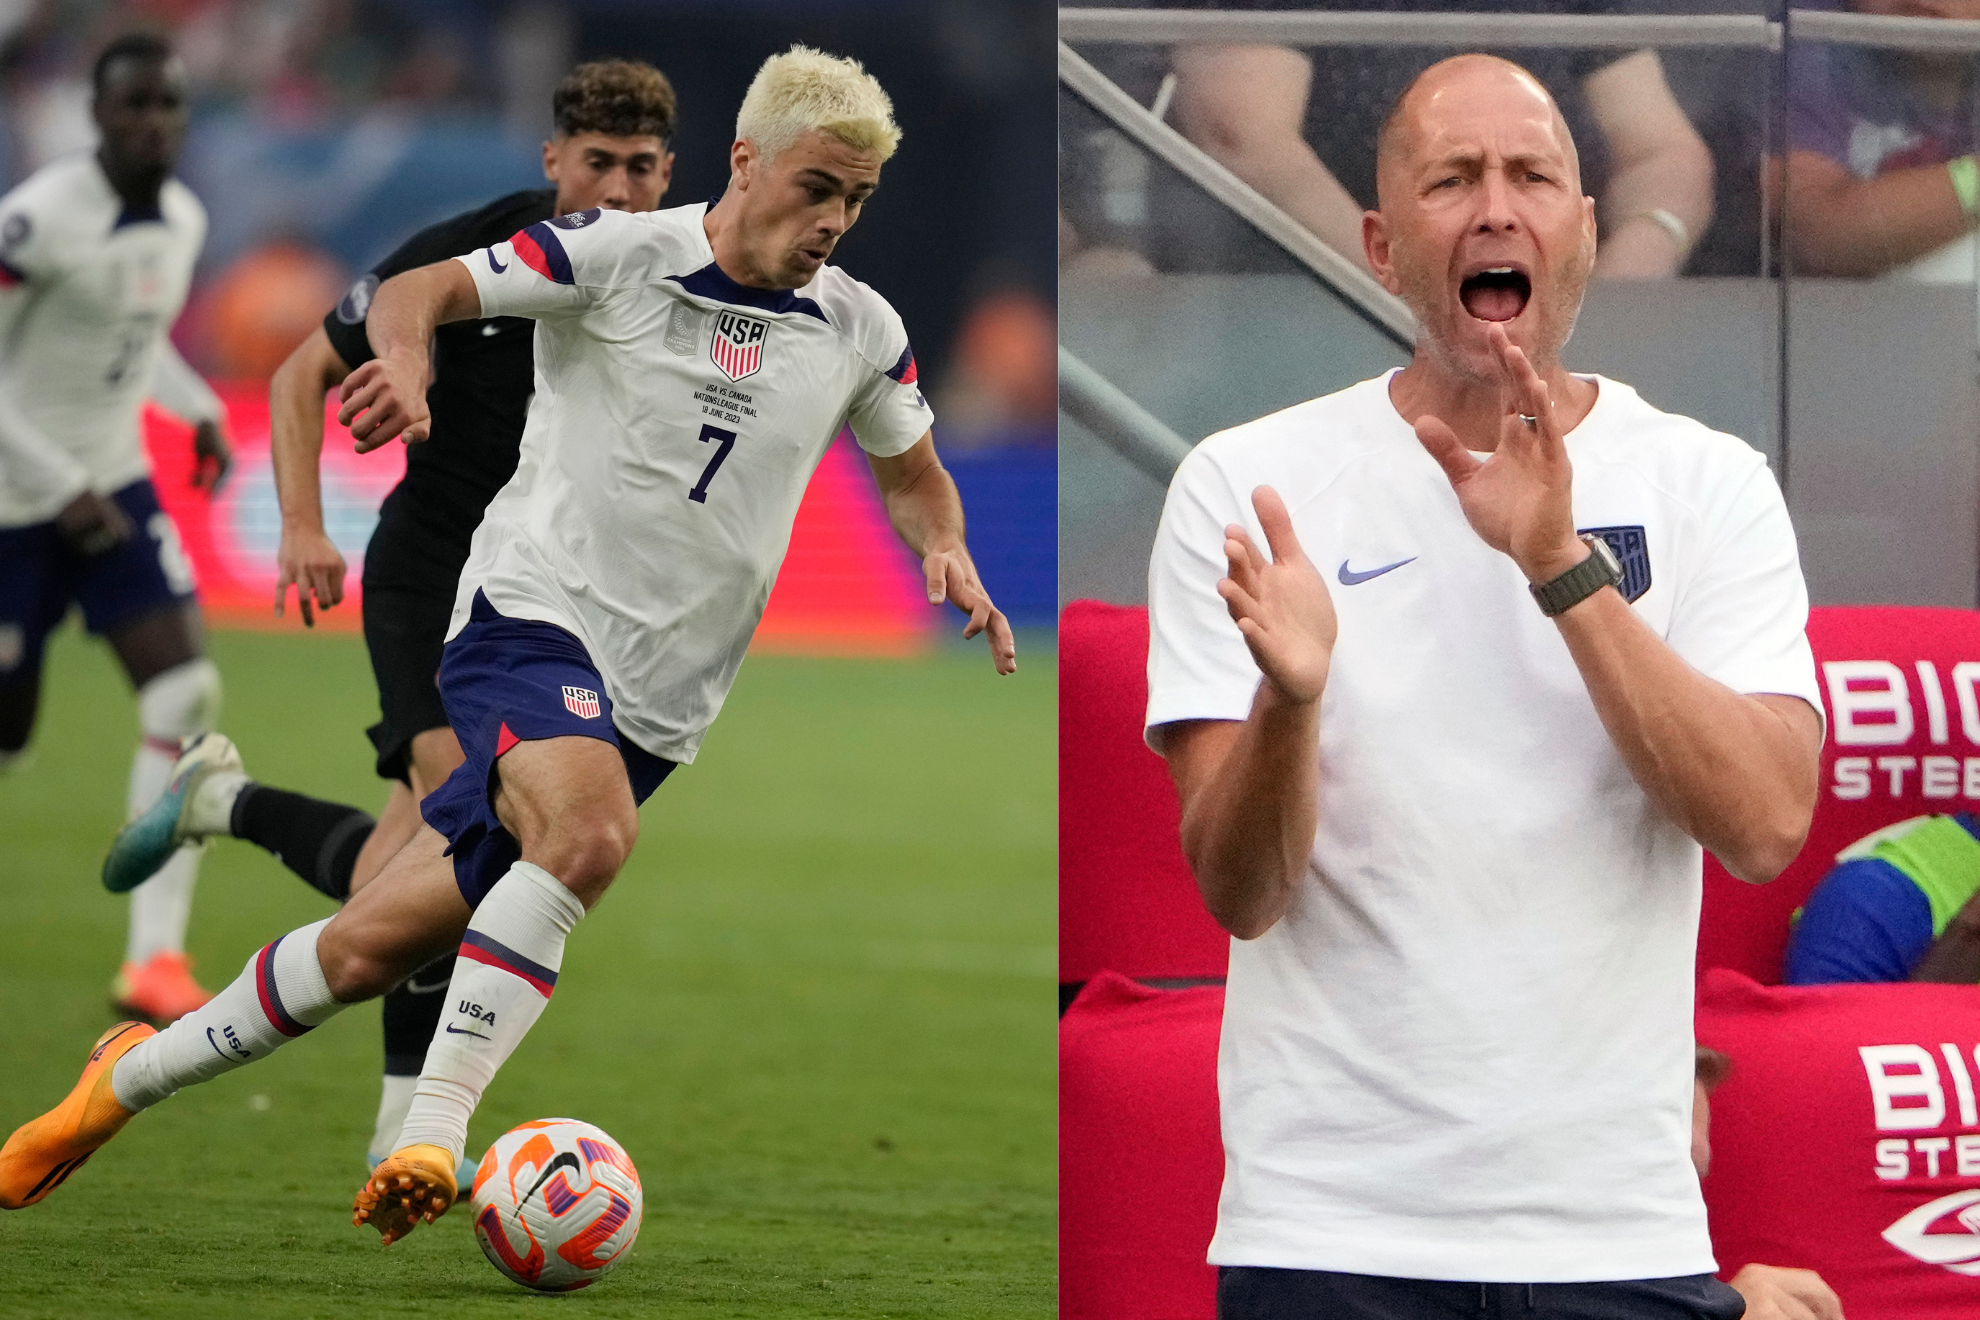 Reyna and Berhalter had a highly-publicized feud last year.